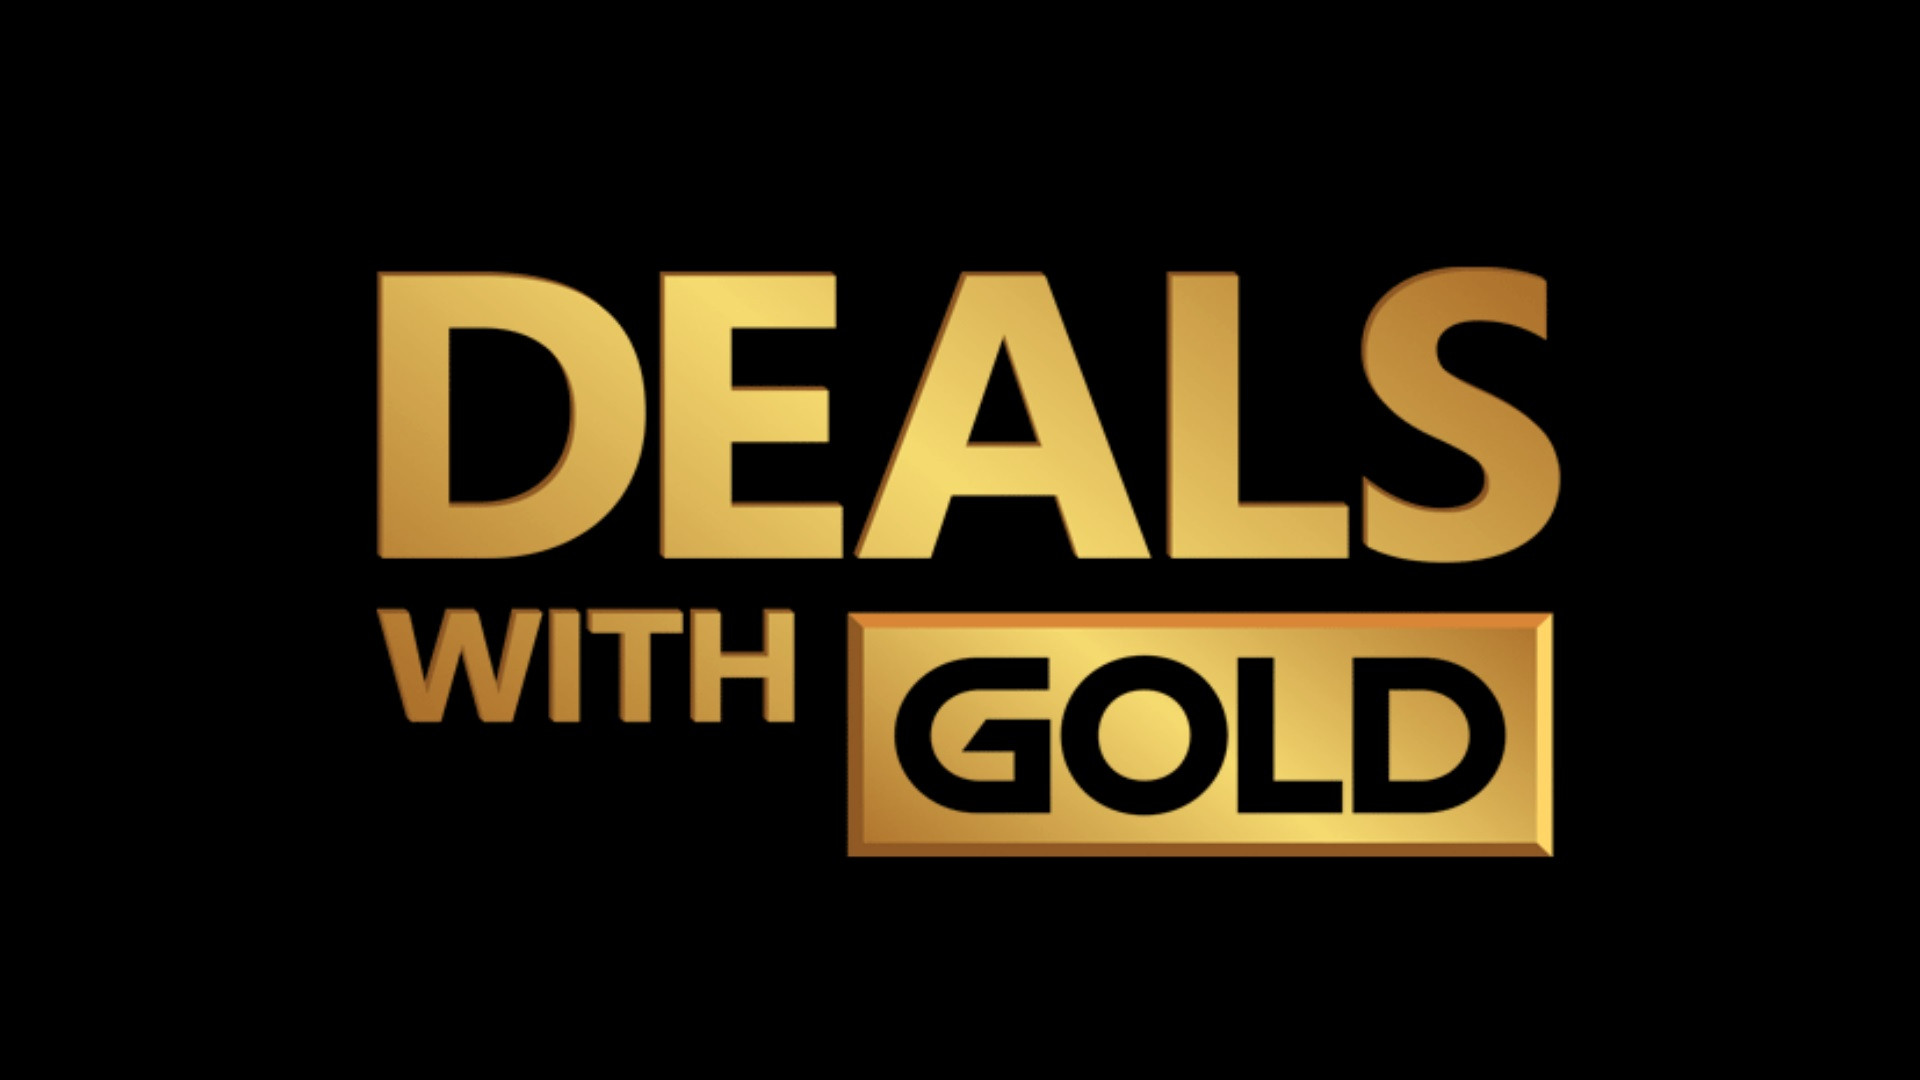 Deals with Gold semaine 4